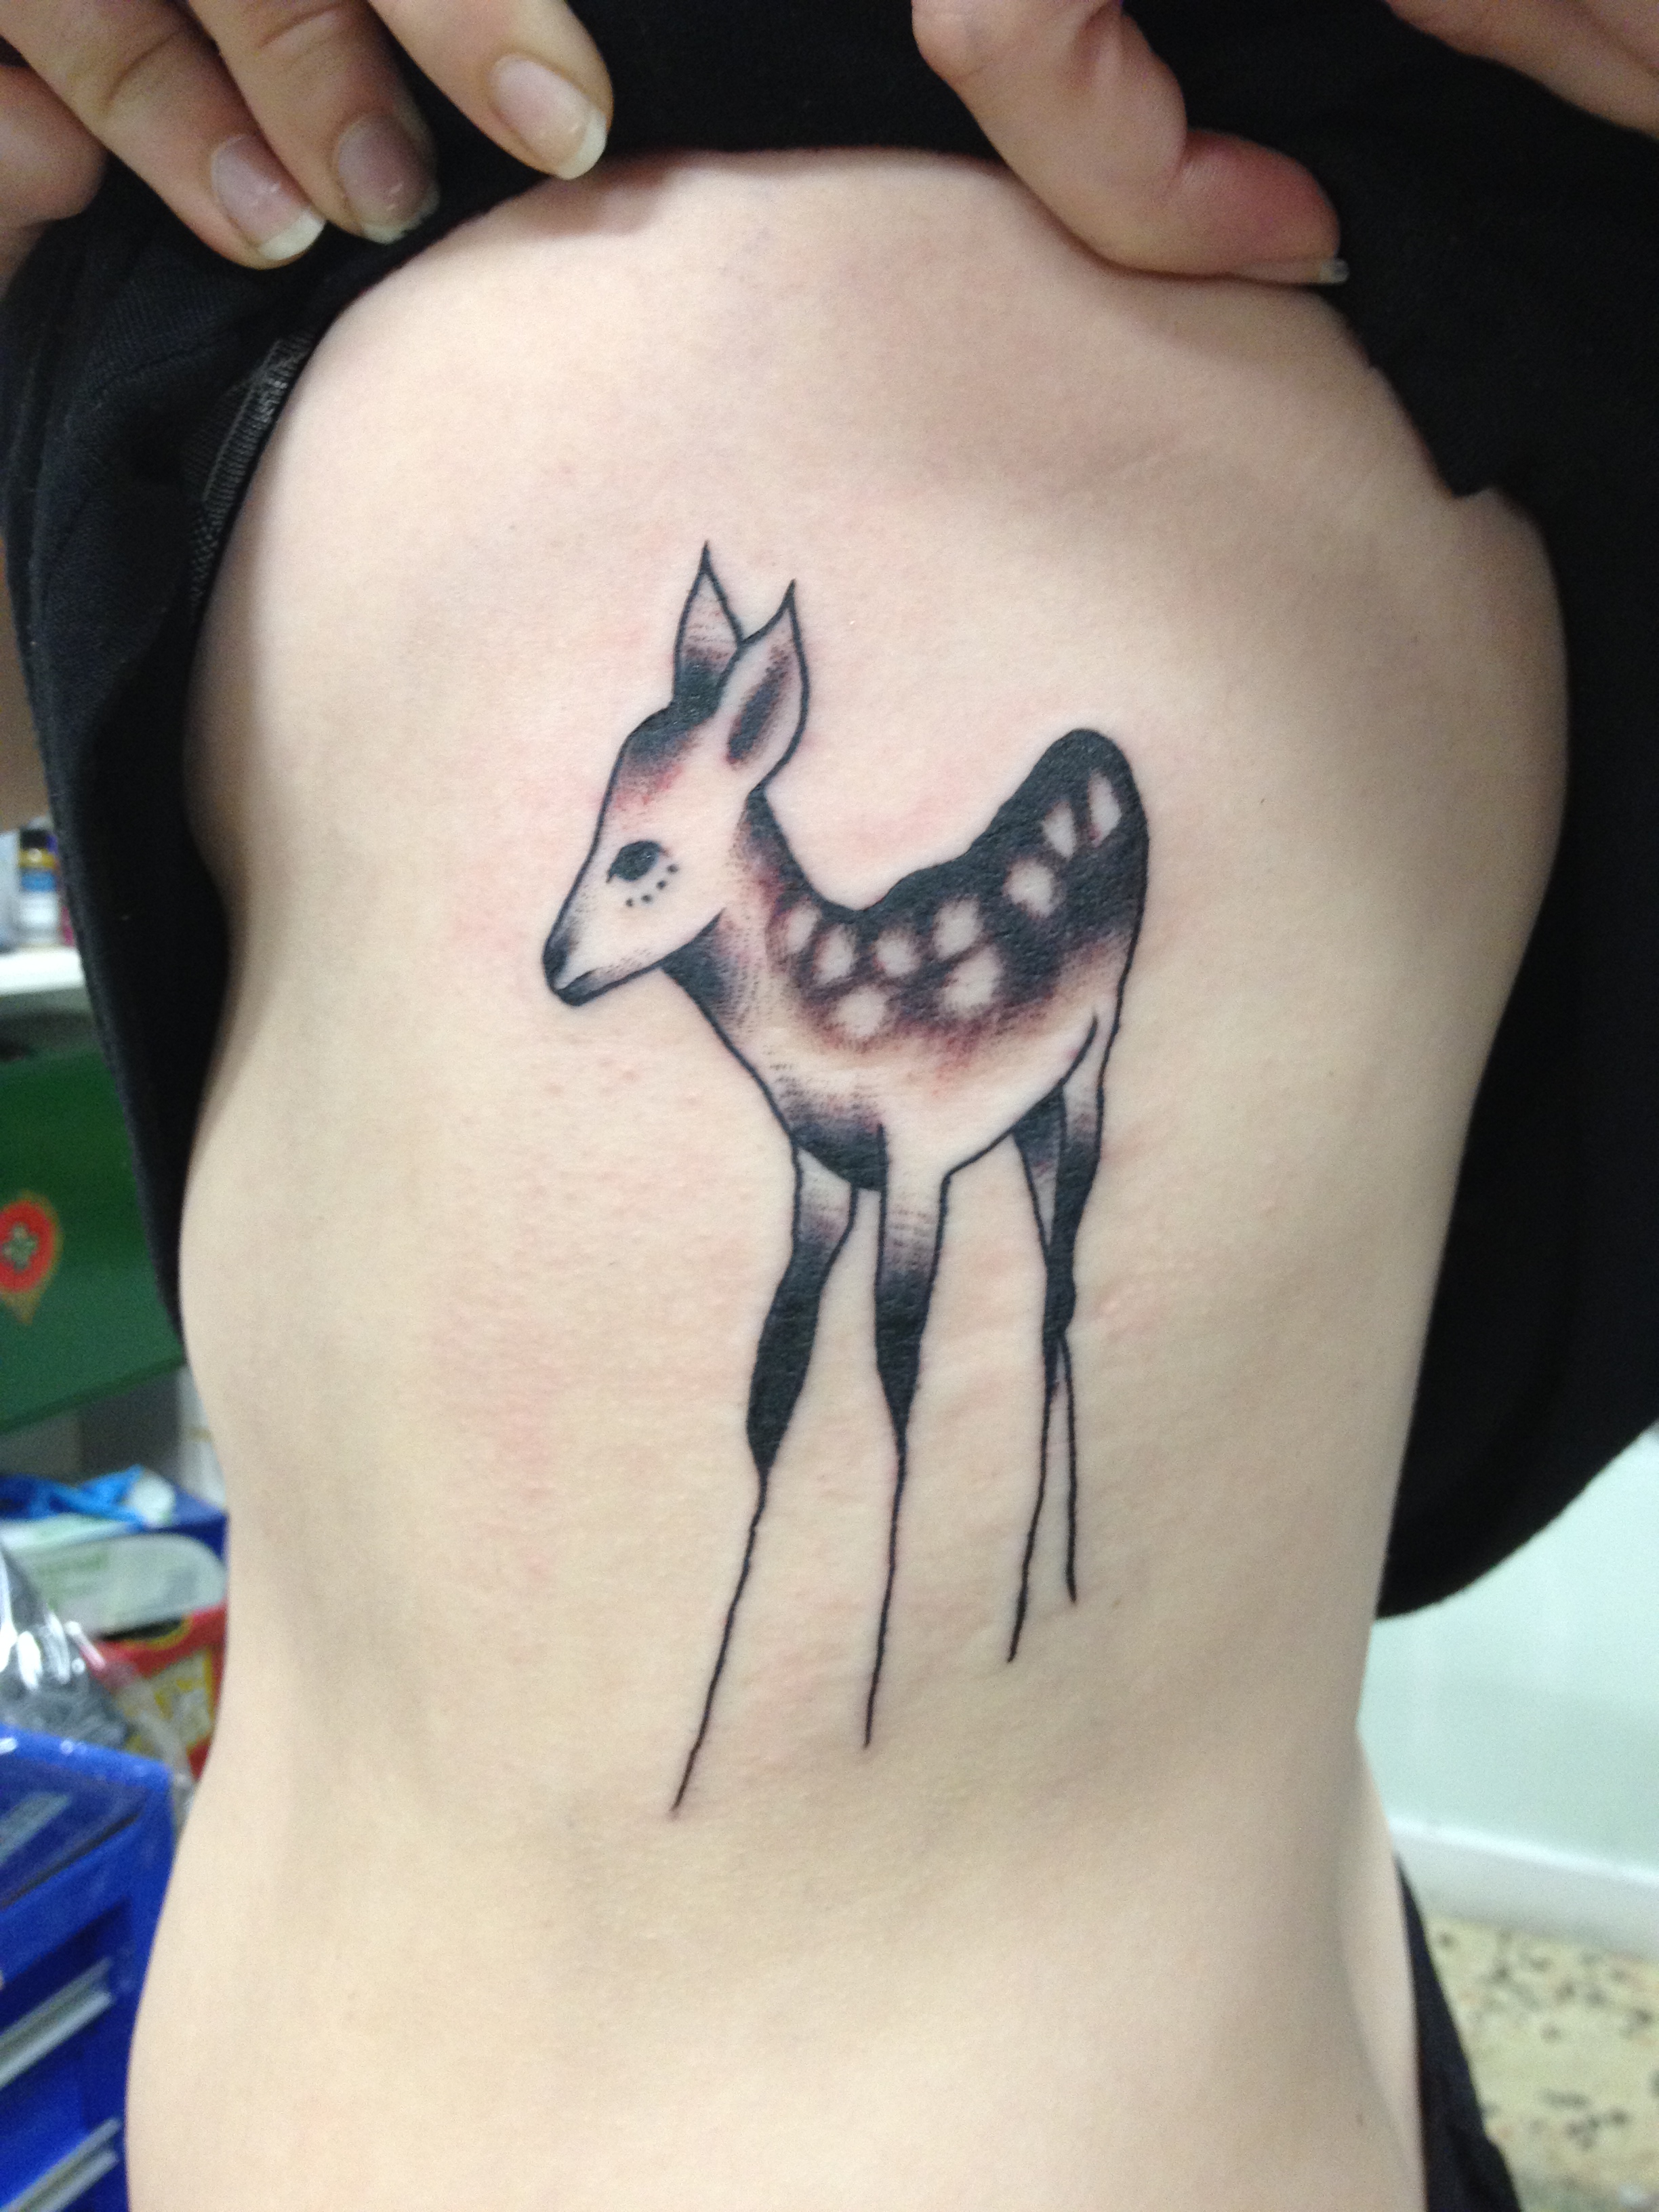 Deer Tattoos Designs, Ideas and Meaning | Tattoos For You